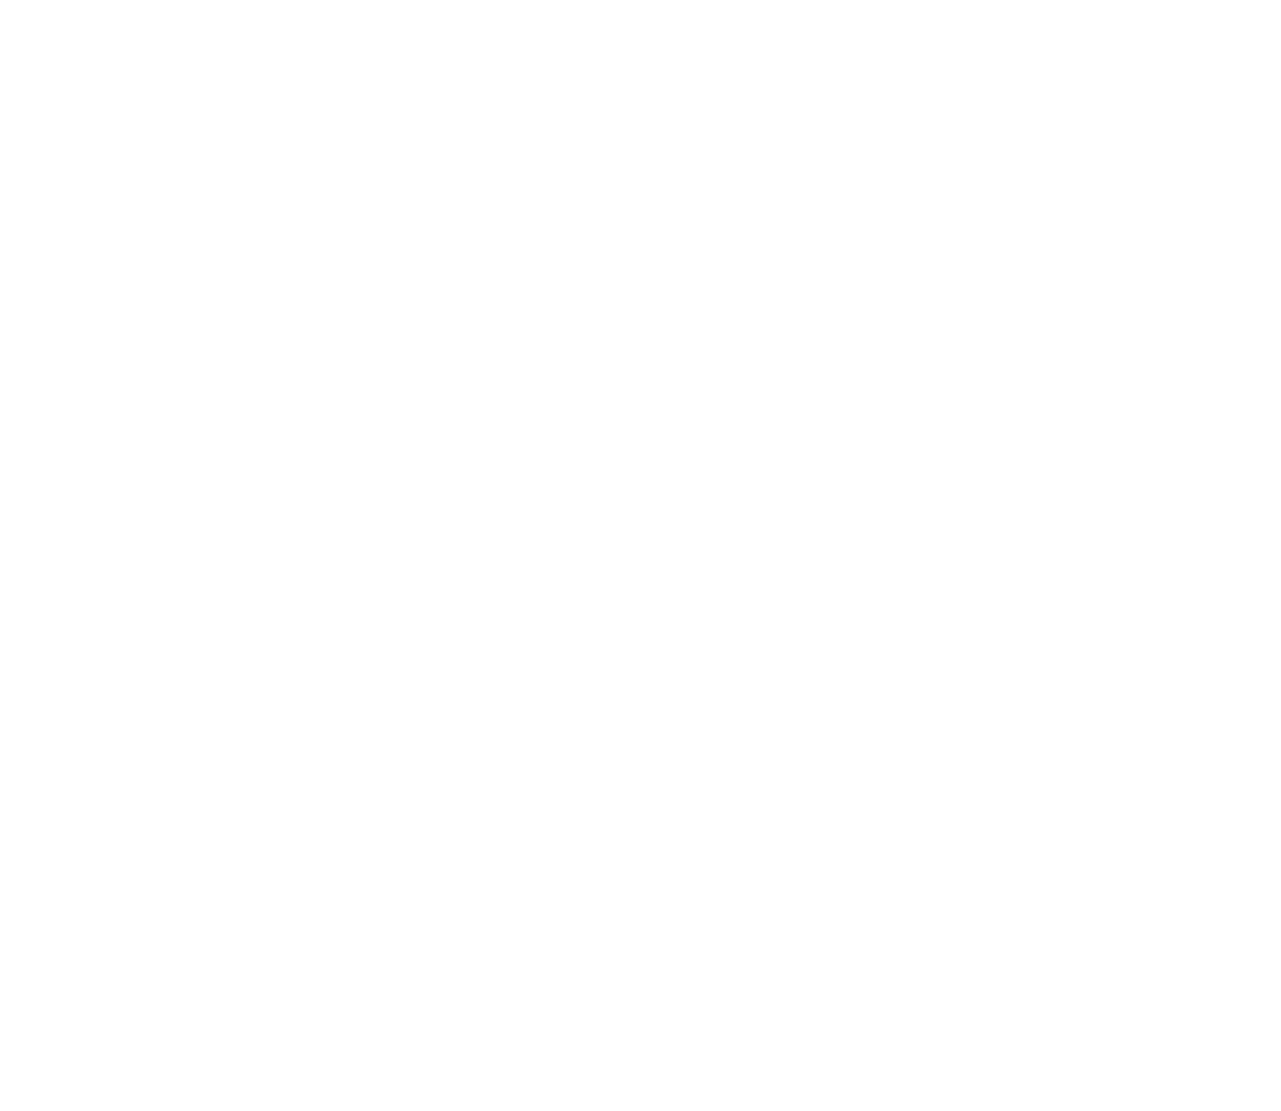 Equitable Climate Action